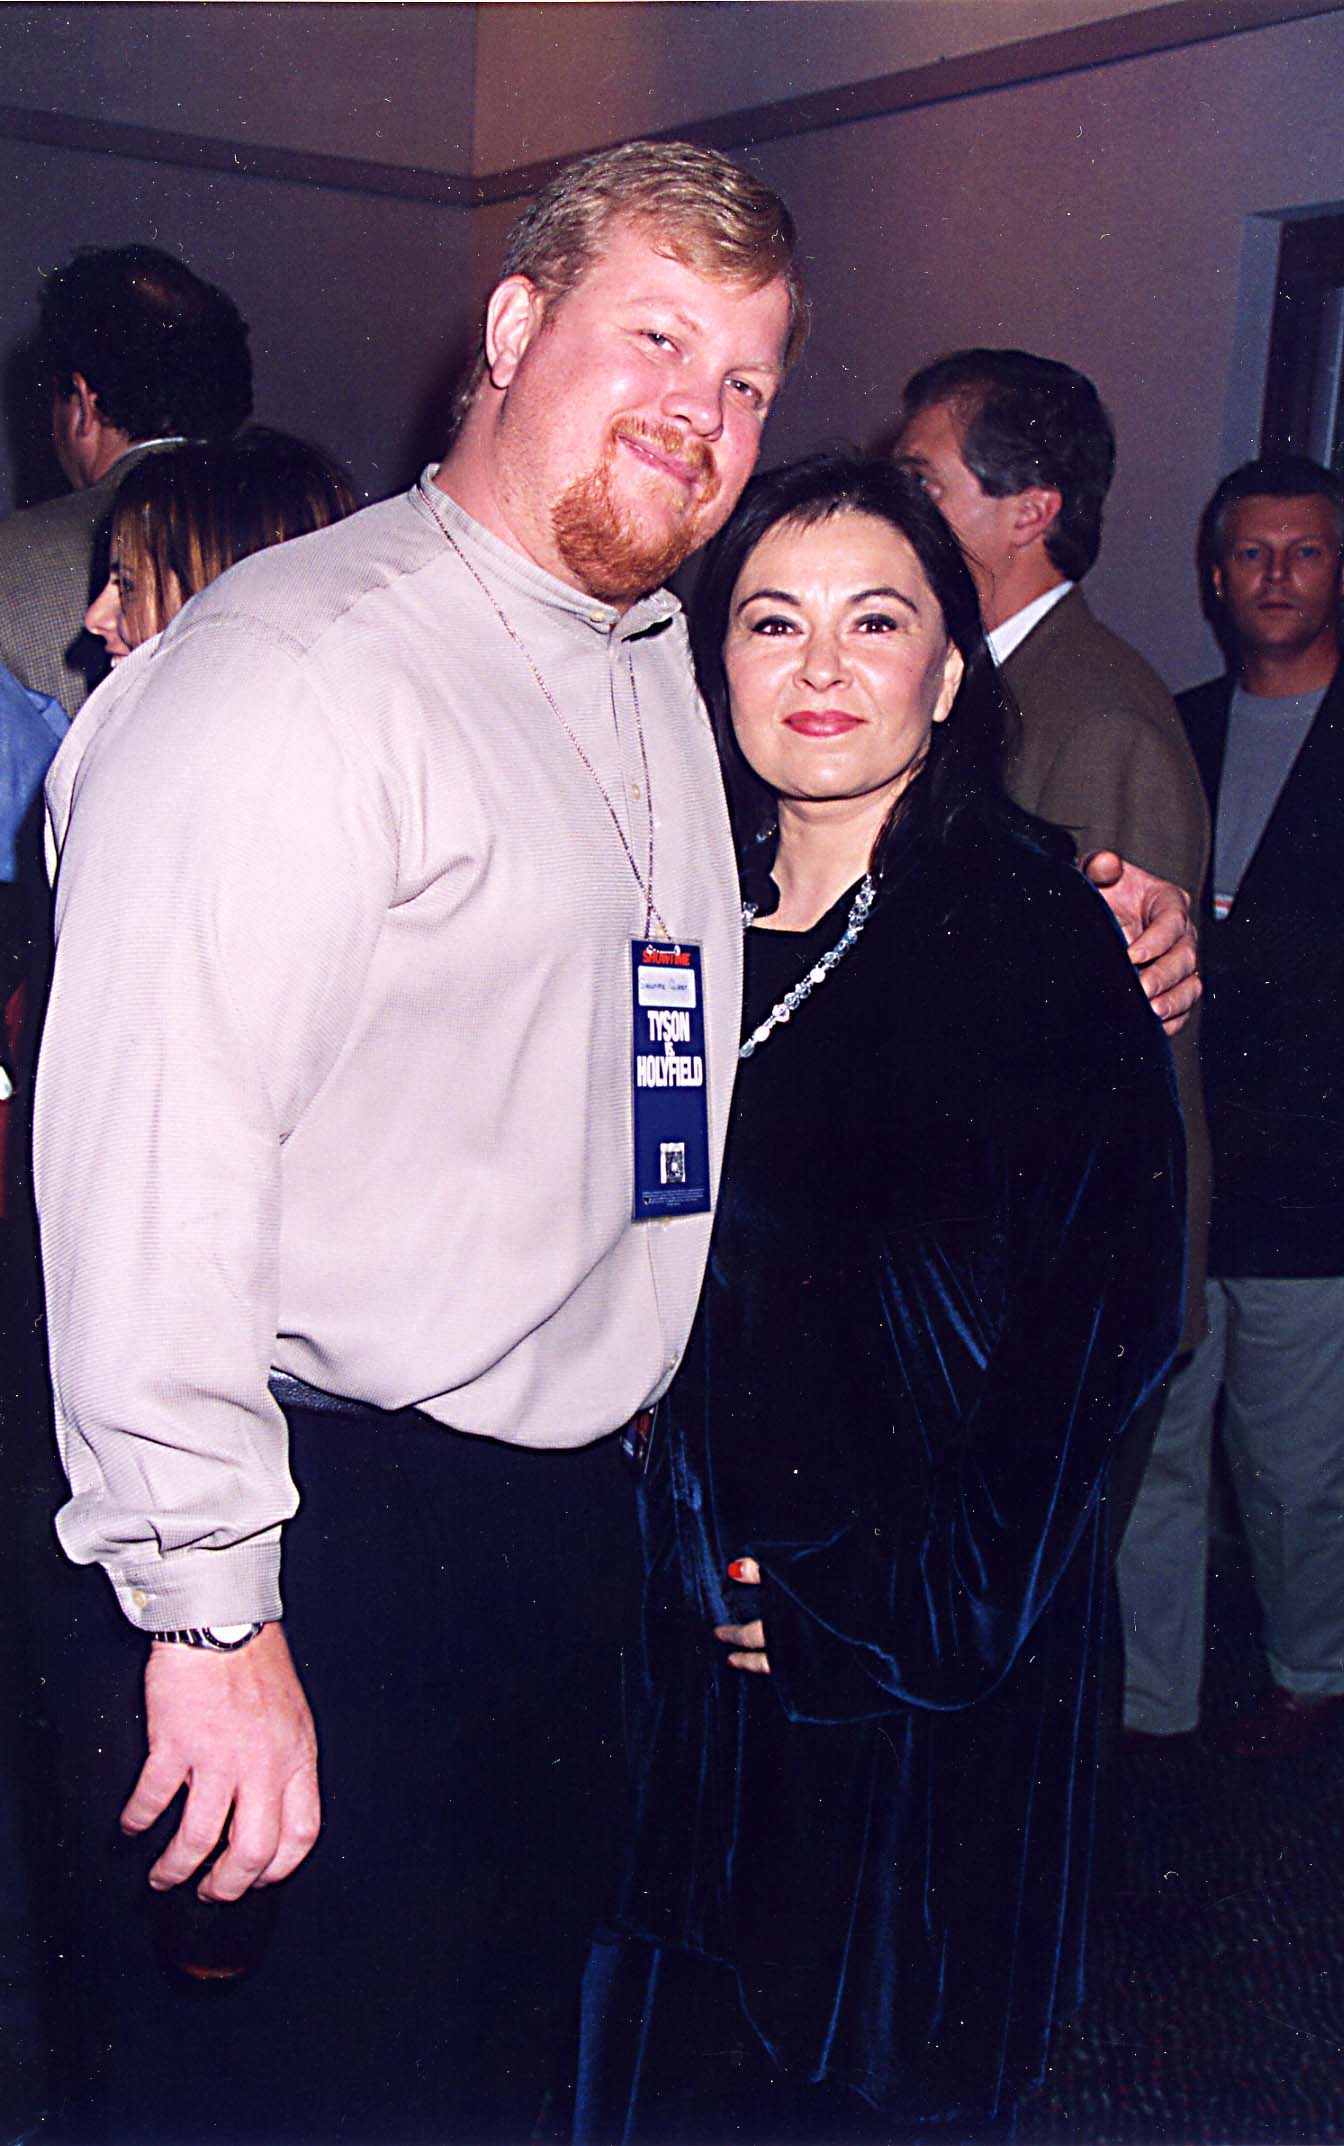 Ben Thomas and Roseanne Barr during a boxing match in Las Vegas, Nevada, on September 7, 1996. | Source: Getty Images